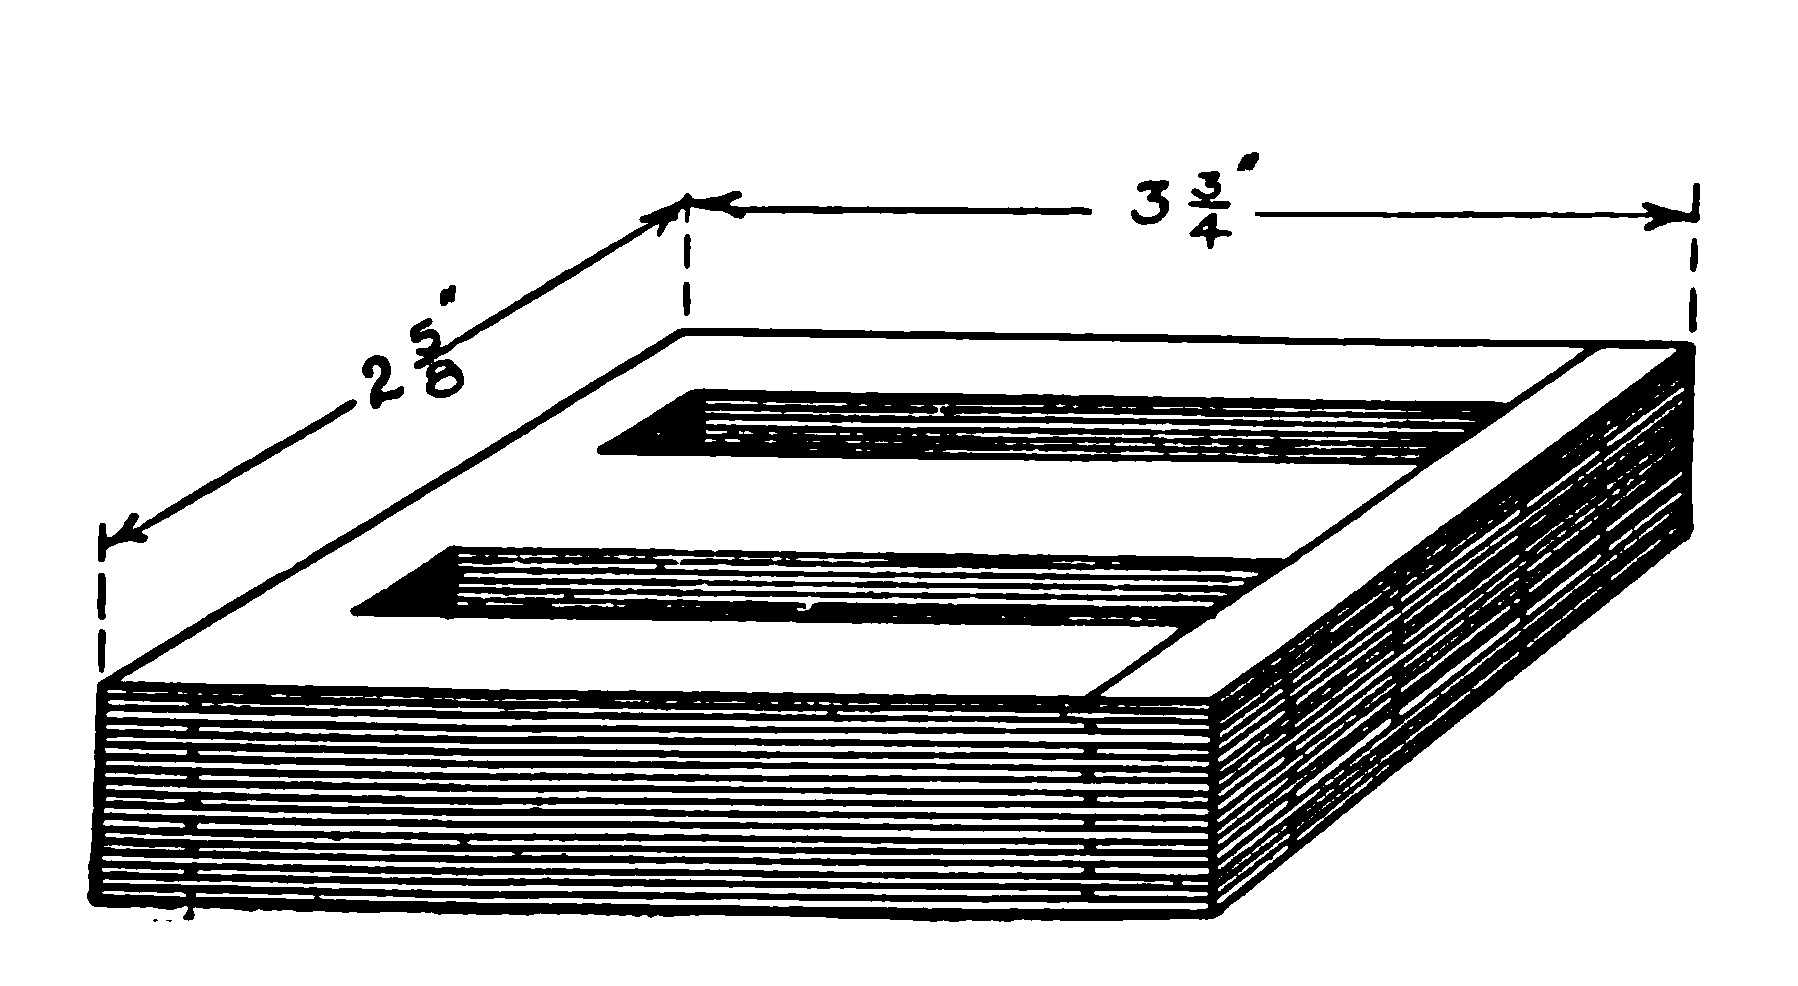 FIG. 60.—Assembly of the Core.